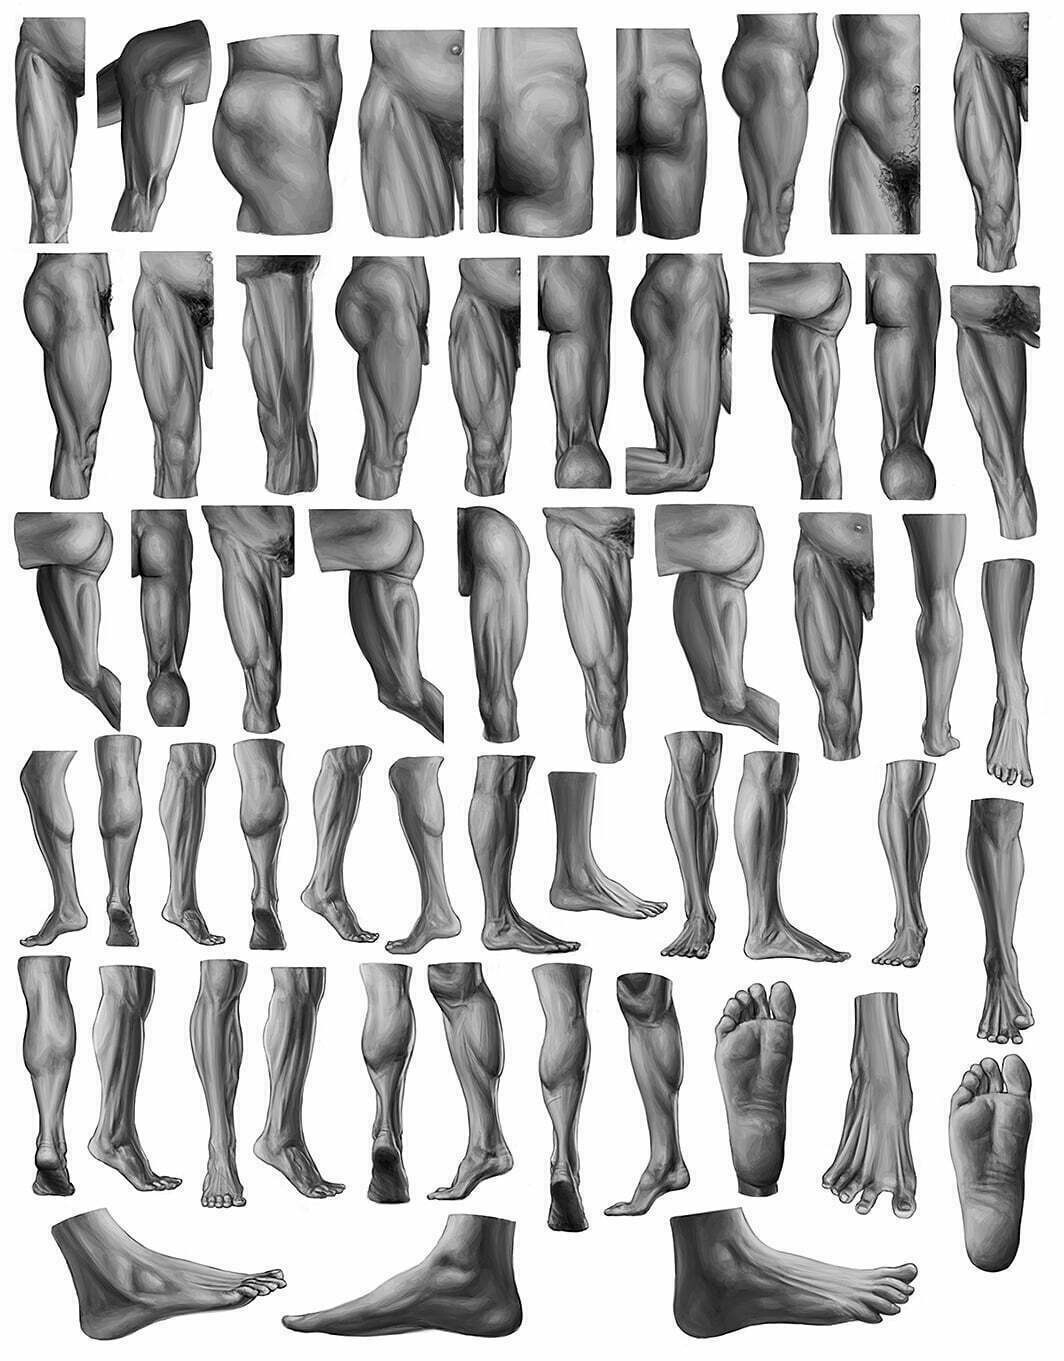 Studies of Lower Body from Eliot Goldfinger's Human Anatomy for Artists